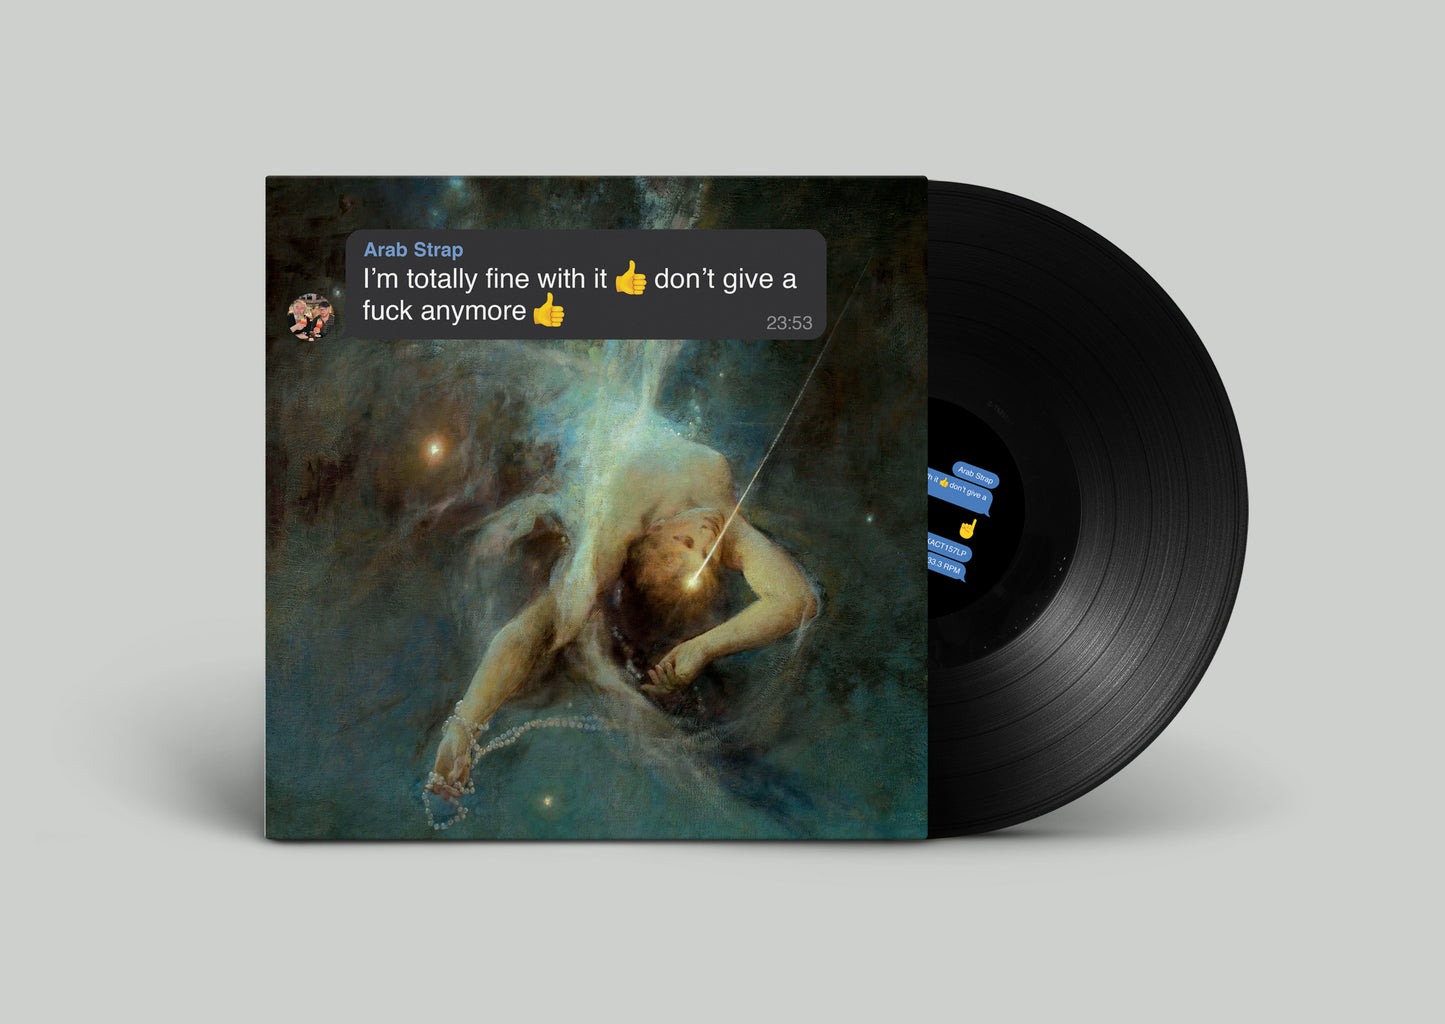 Arab Strap 'I'm totally fine with it 👍 don't give a fuck anymore 👍' LP